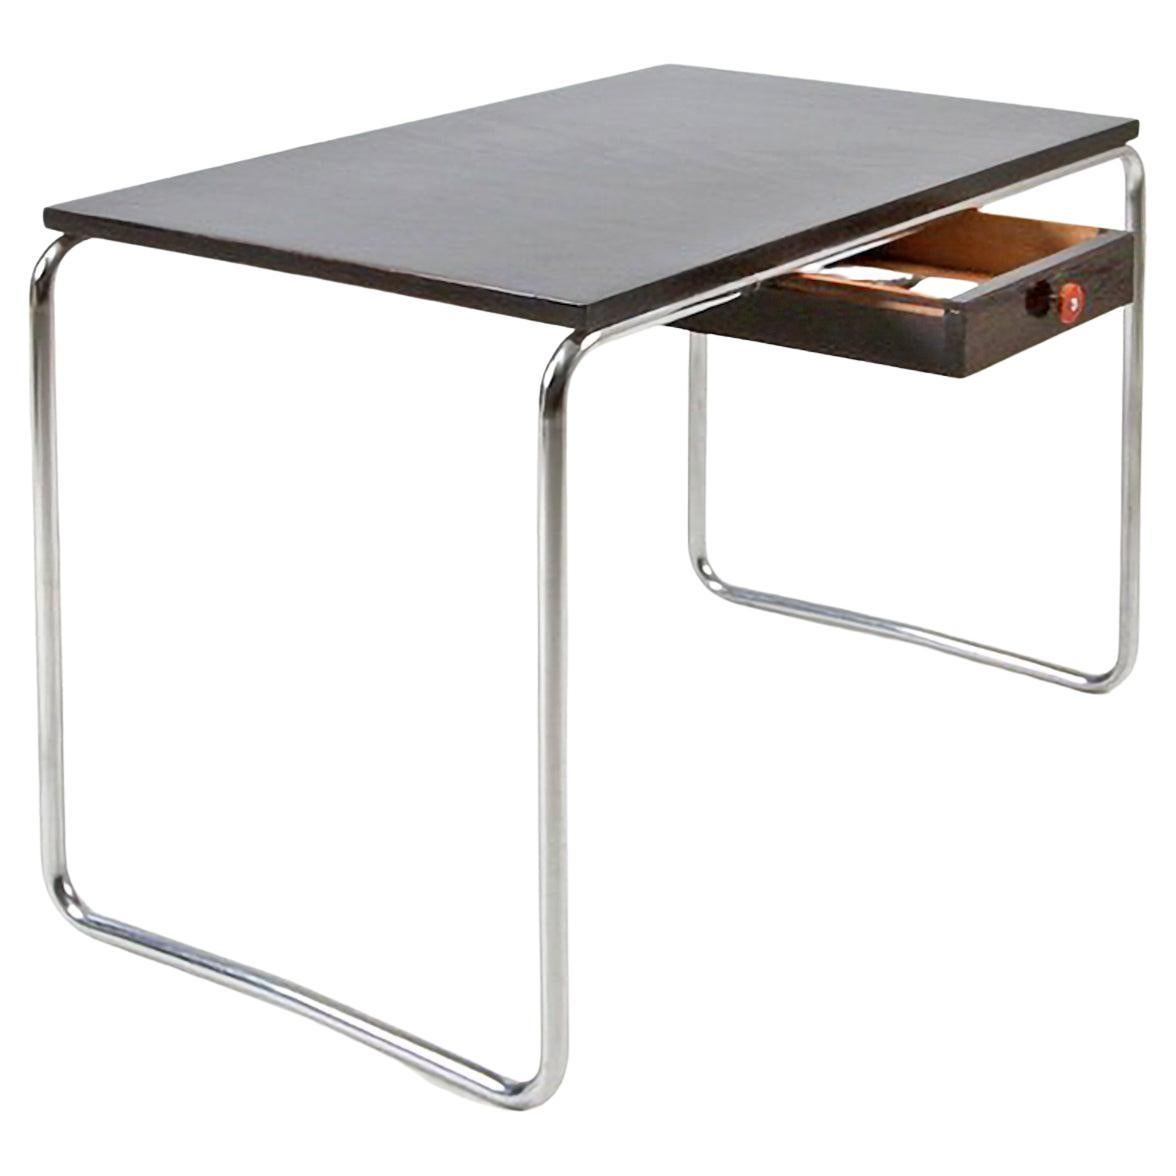 Bespoke Modernist Tubular Steel Table in Chromed Metal and Glossy Lacquered Wood For Sale